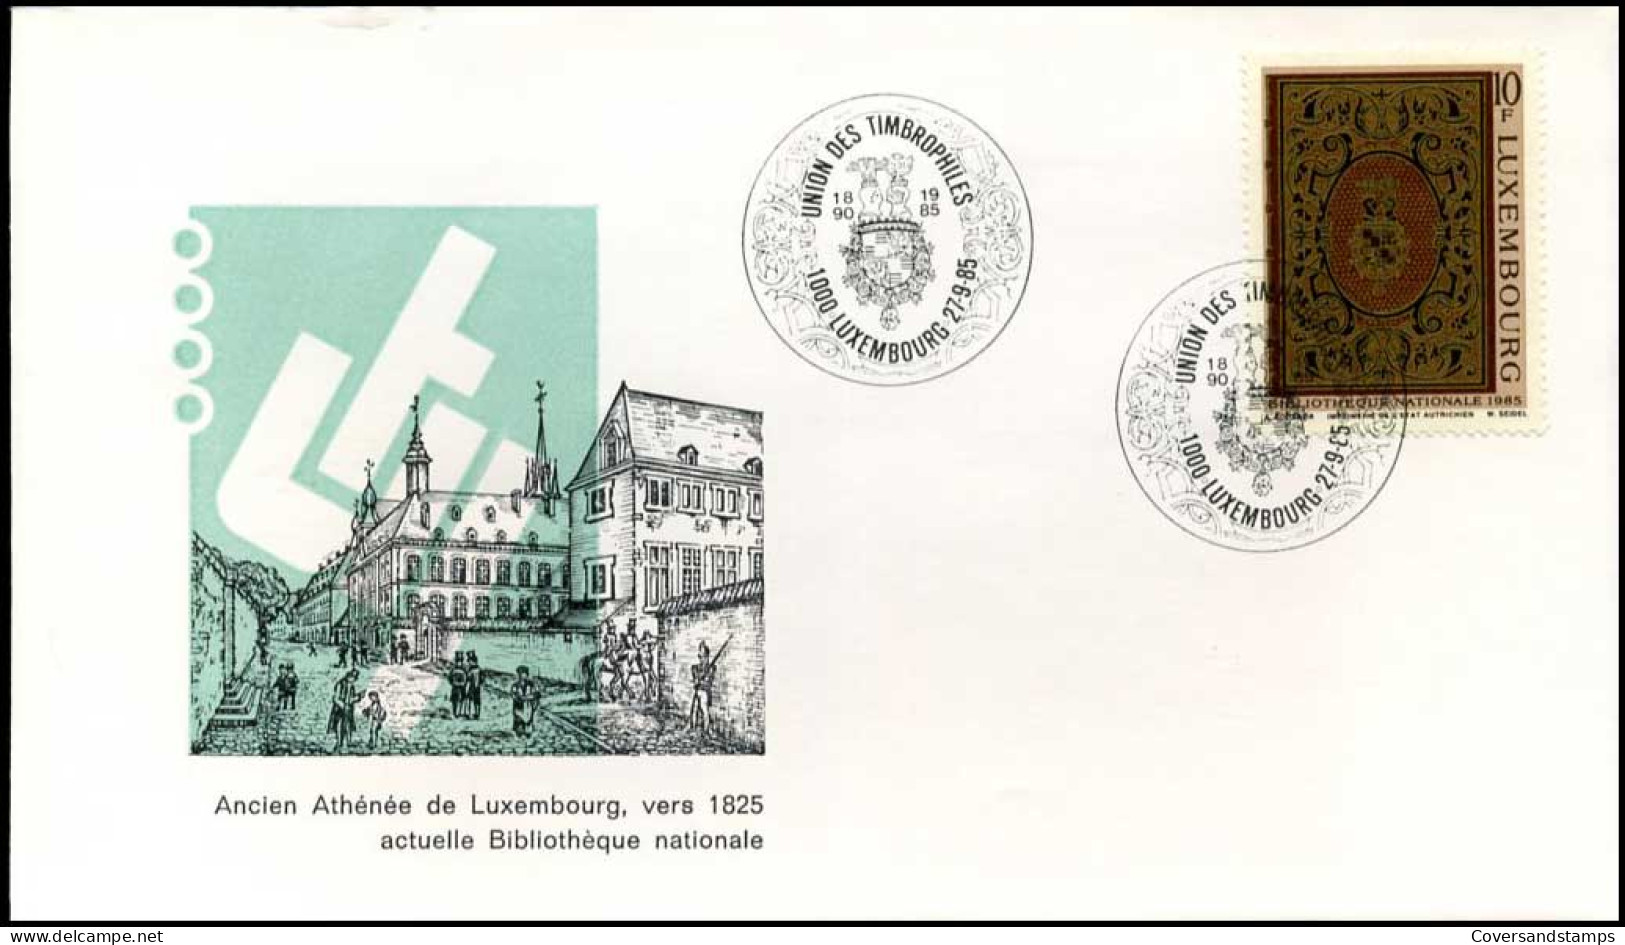 Luxembourg - FDC - Bibliothèque Nationale - FDC